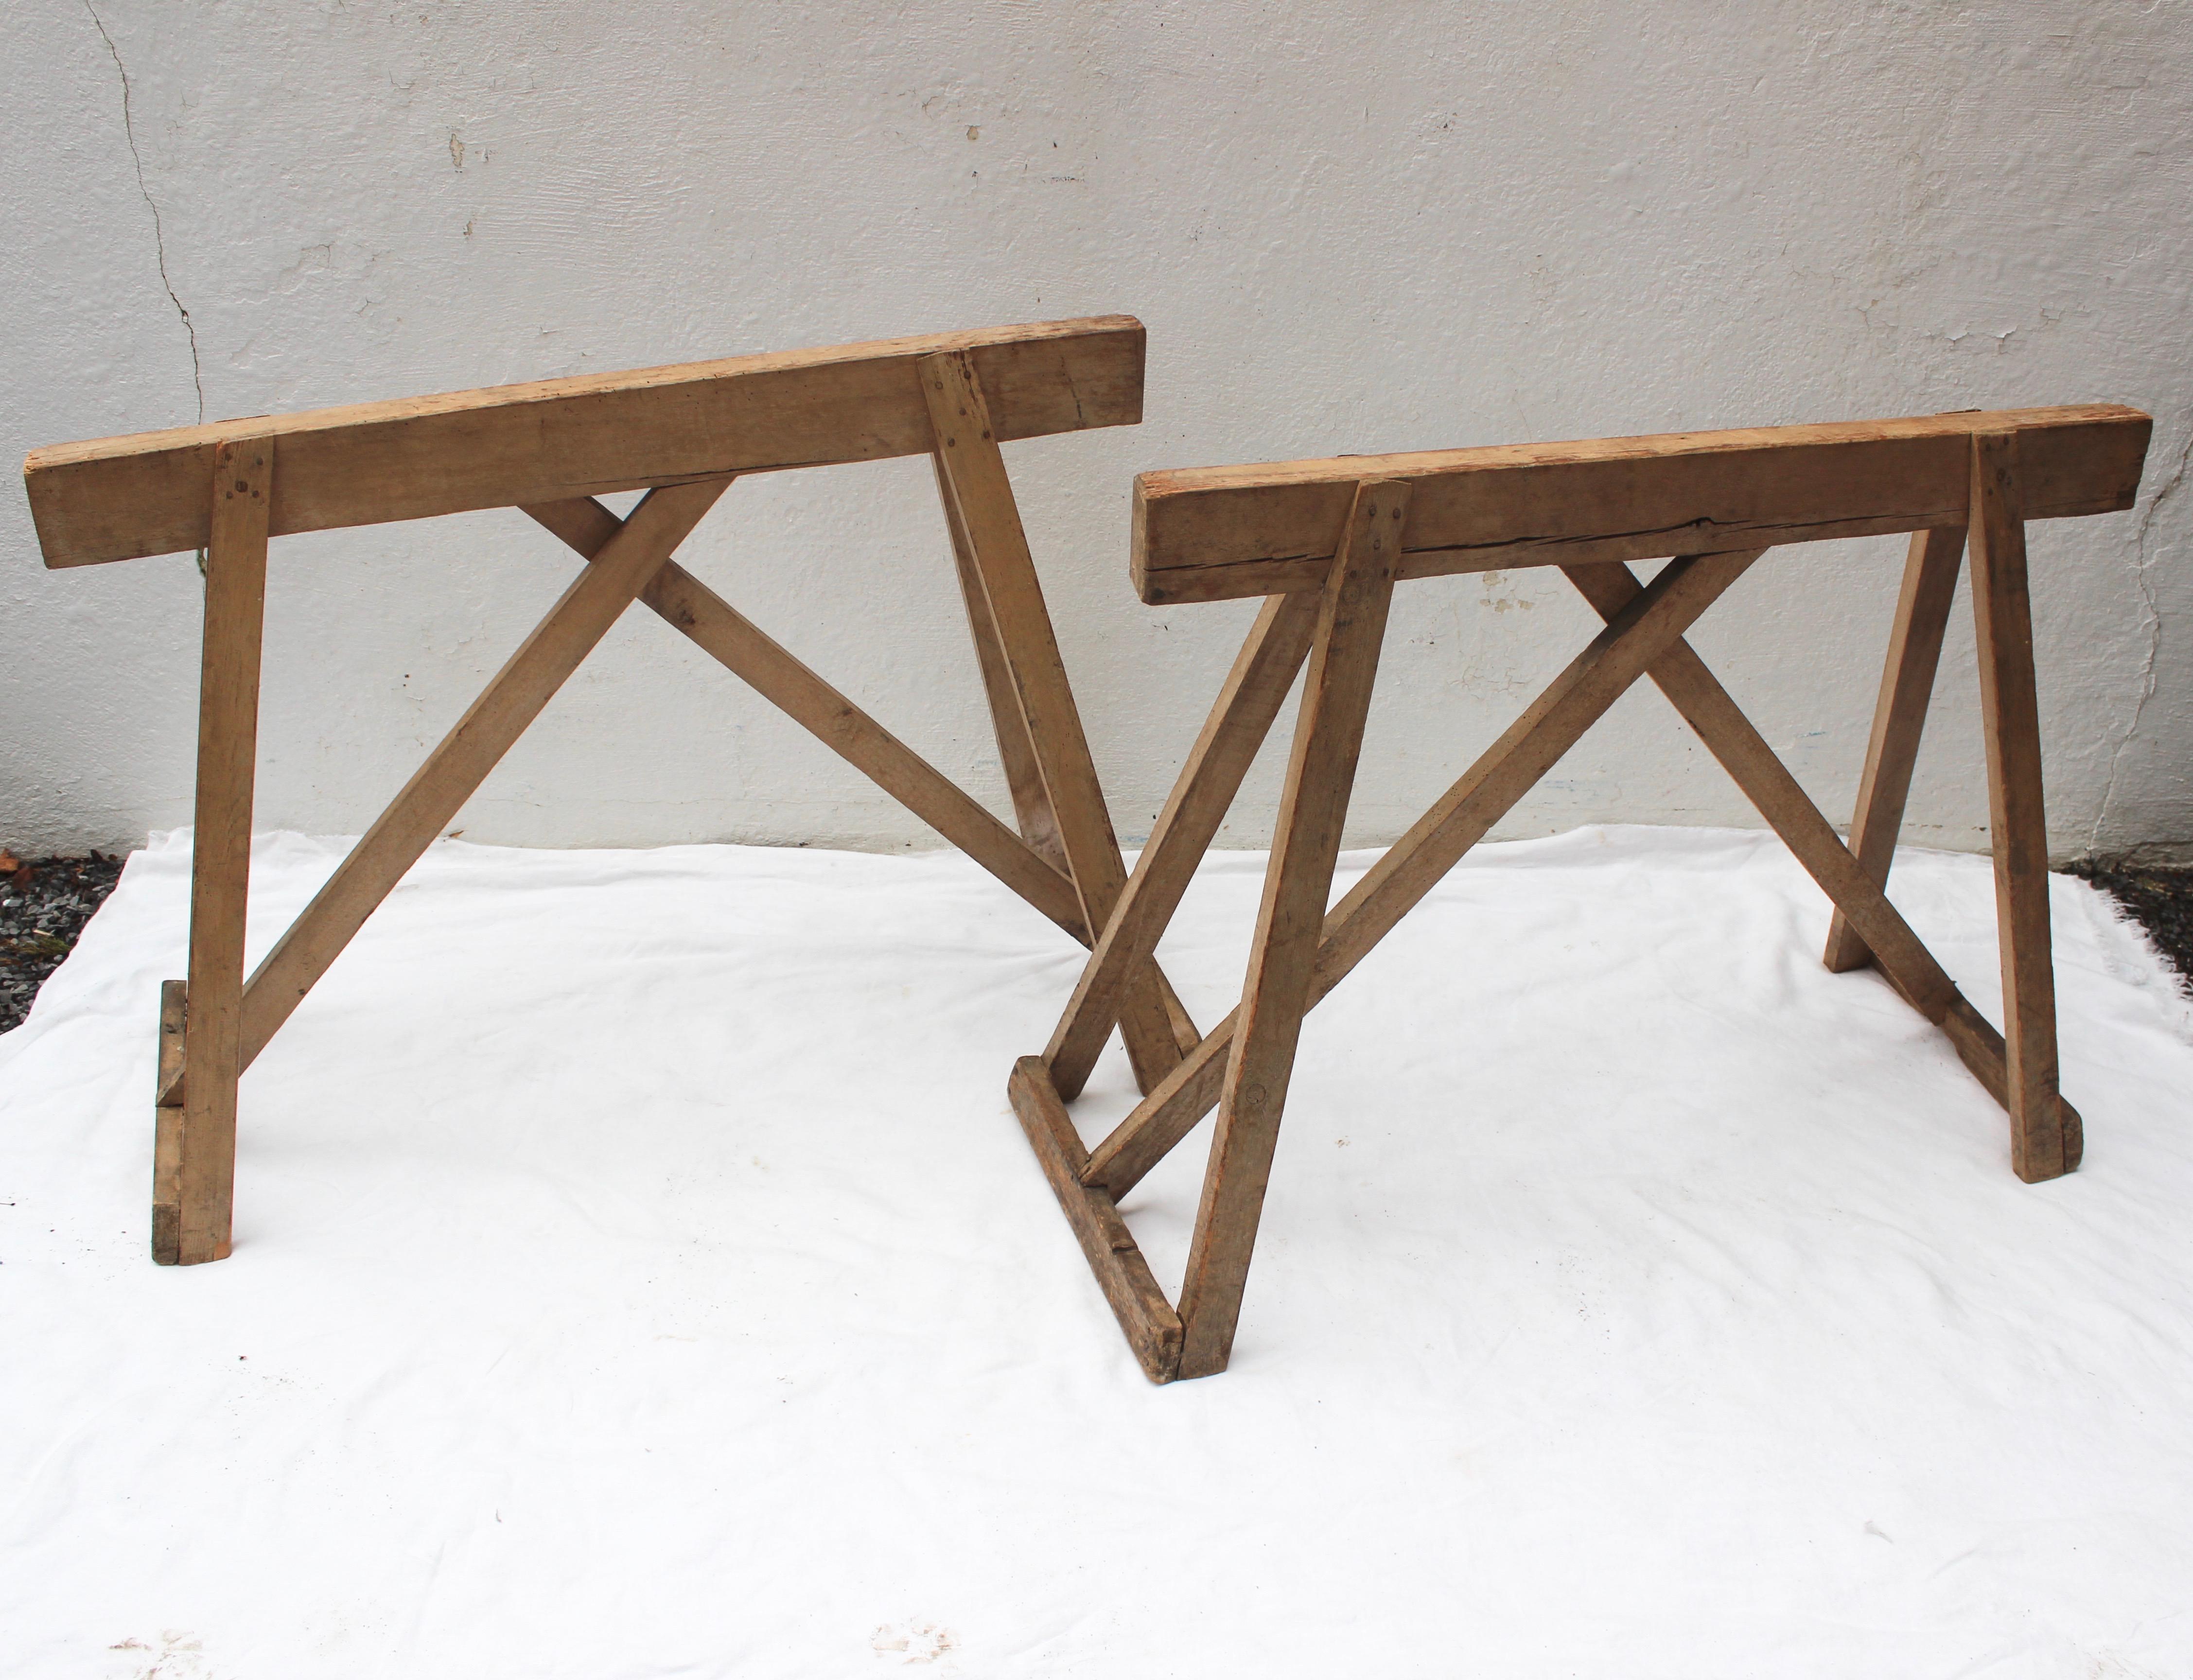 Antique wood saw horse table bases.